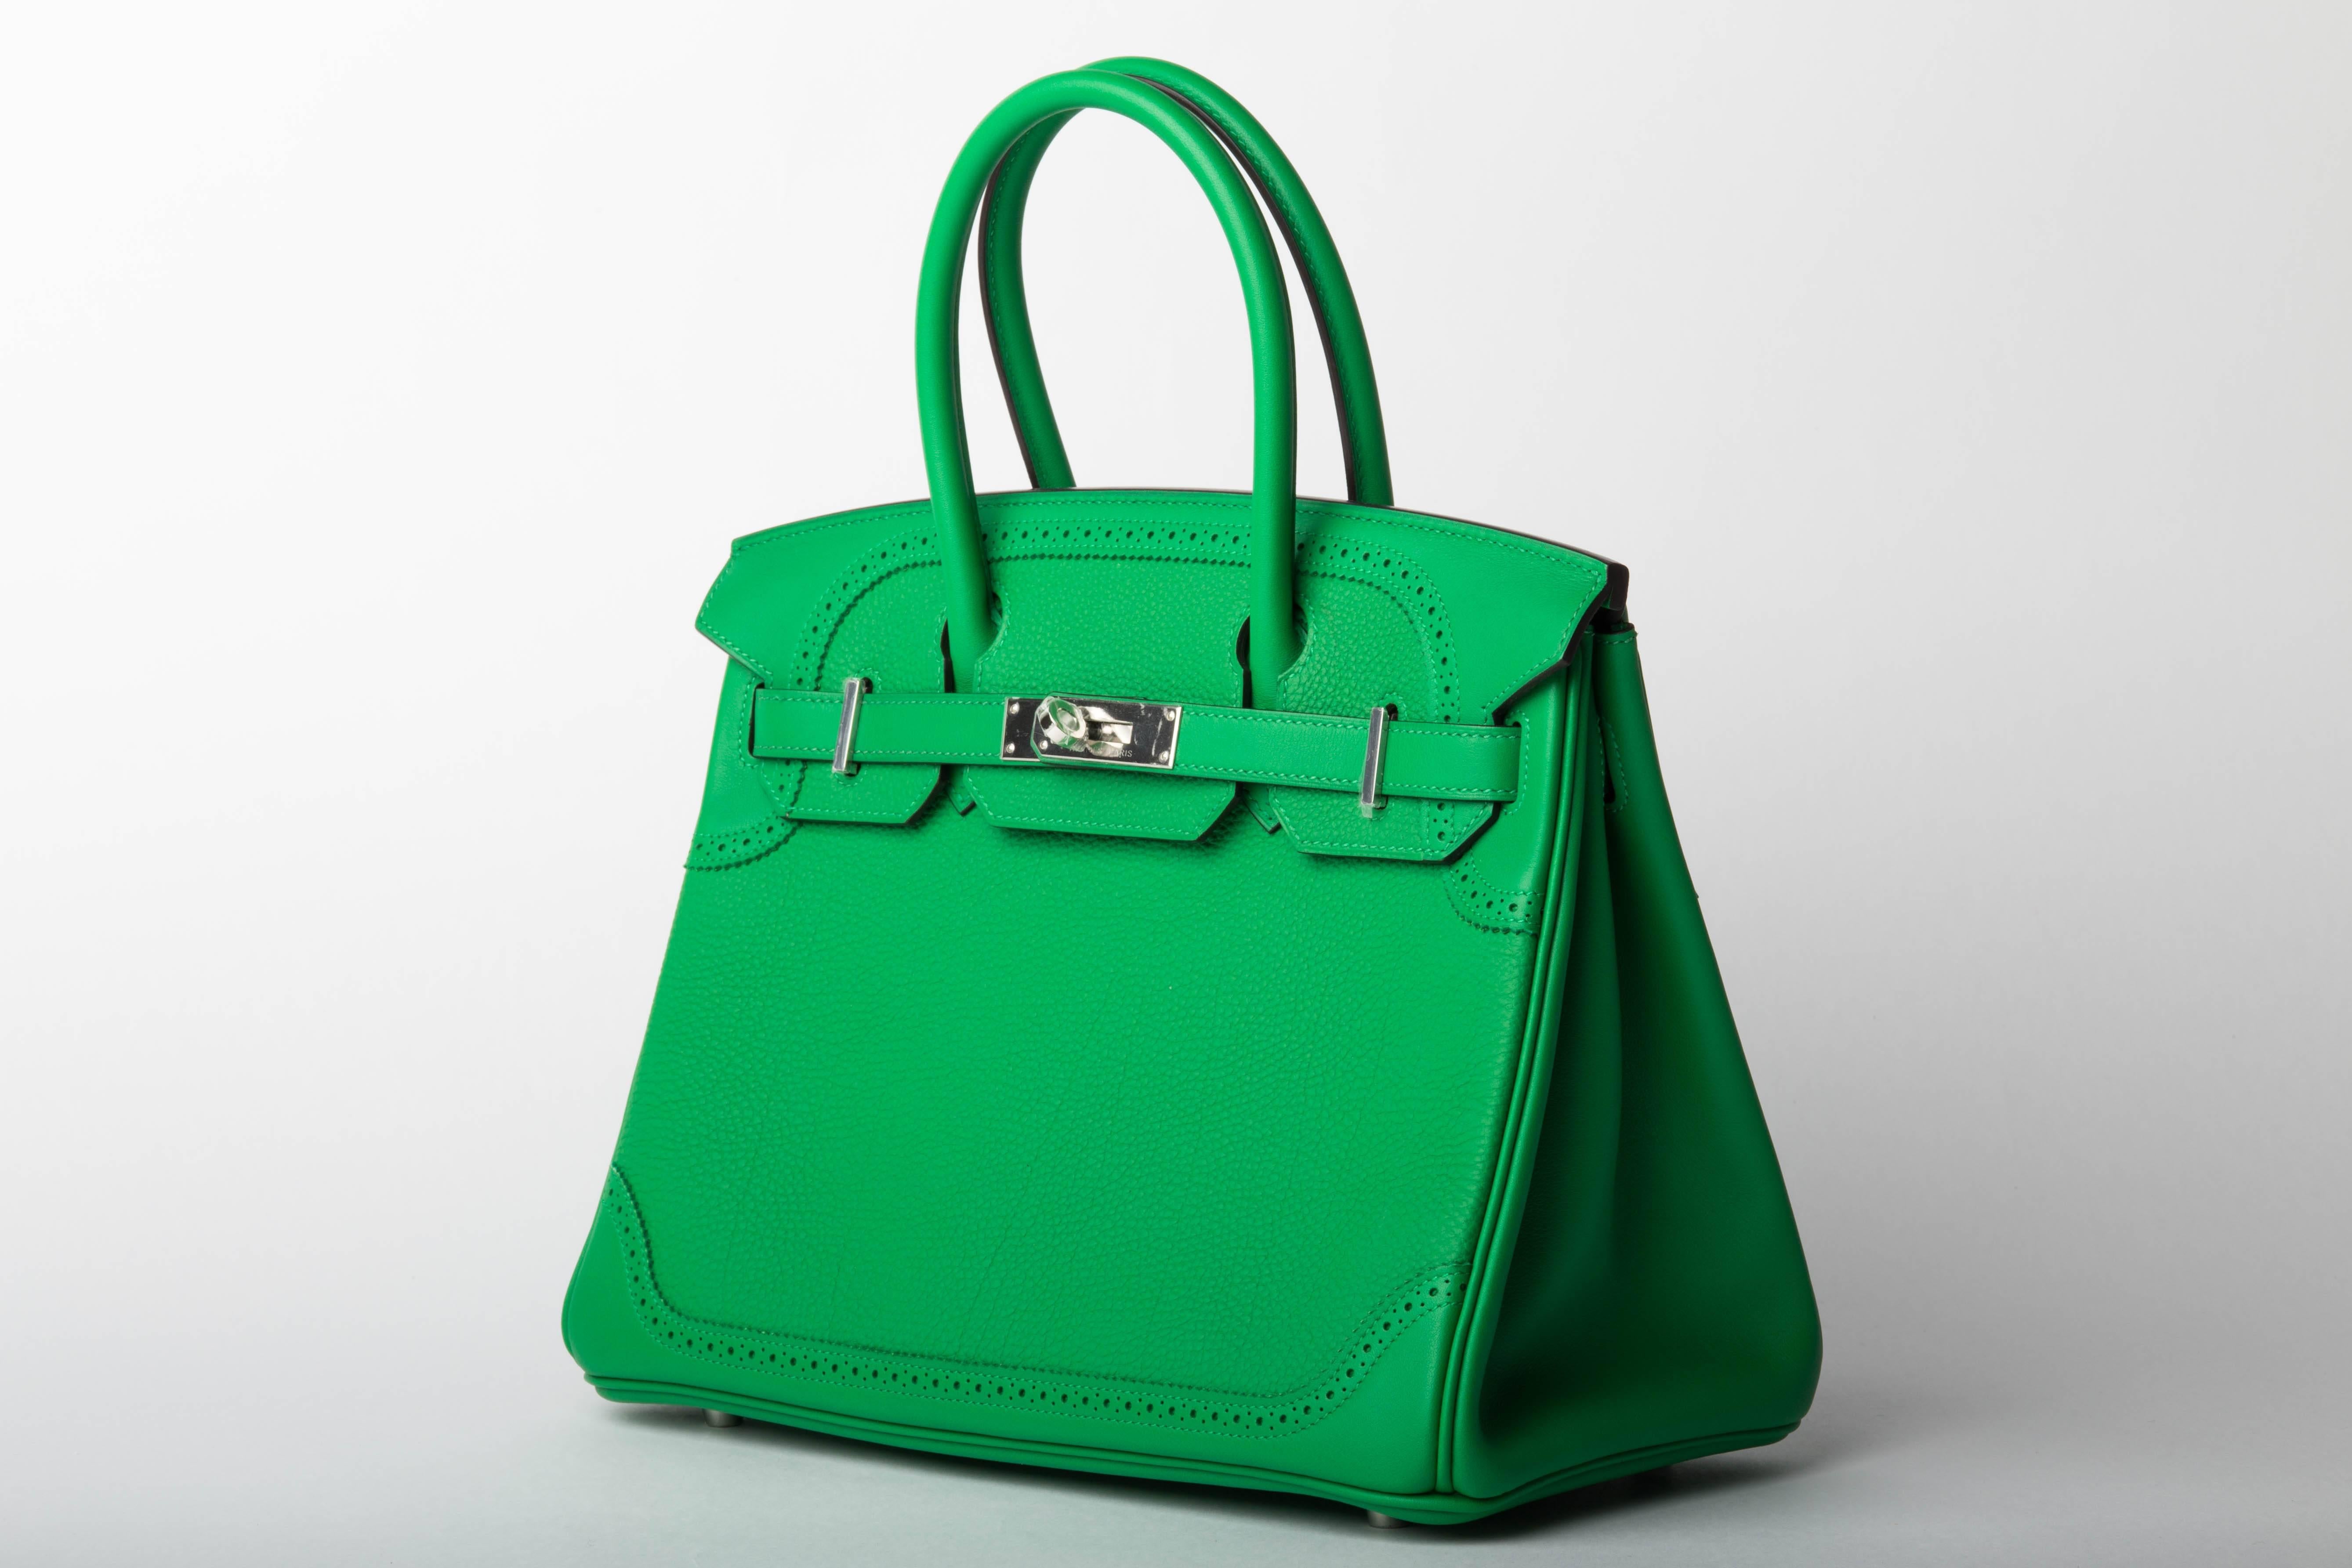 The name Ghillies comes from the lace like leather detail originally used on Hermes men brogues! 

This an alive and bright  Bamboo green color of Hermes! 

This bag comes with all its details attached -  lock, keys, clochette, a fabric sleeper